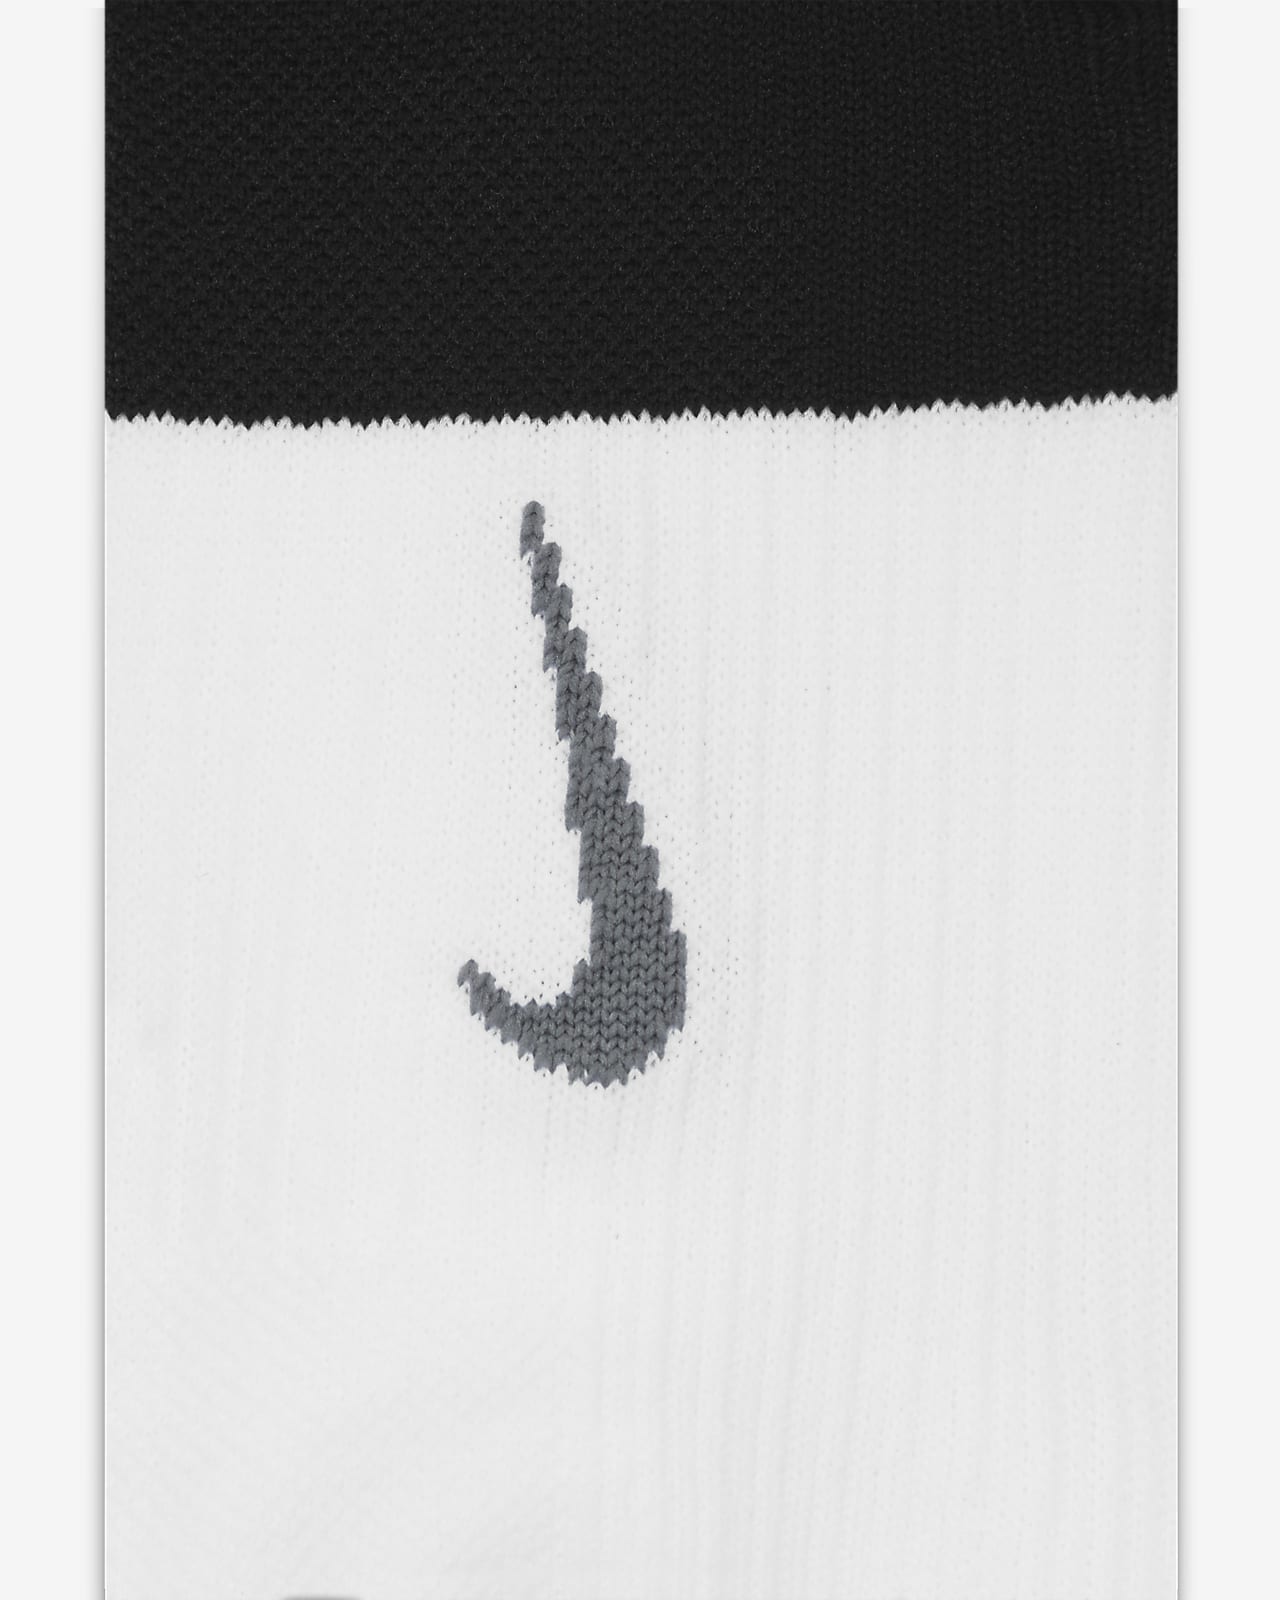 Nike Mujer Calcetines Everyday Plus Lightweight 3 Pares, Multi-Color, M :  : Ropa, Zapatos y Accesorios